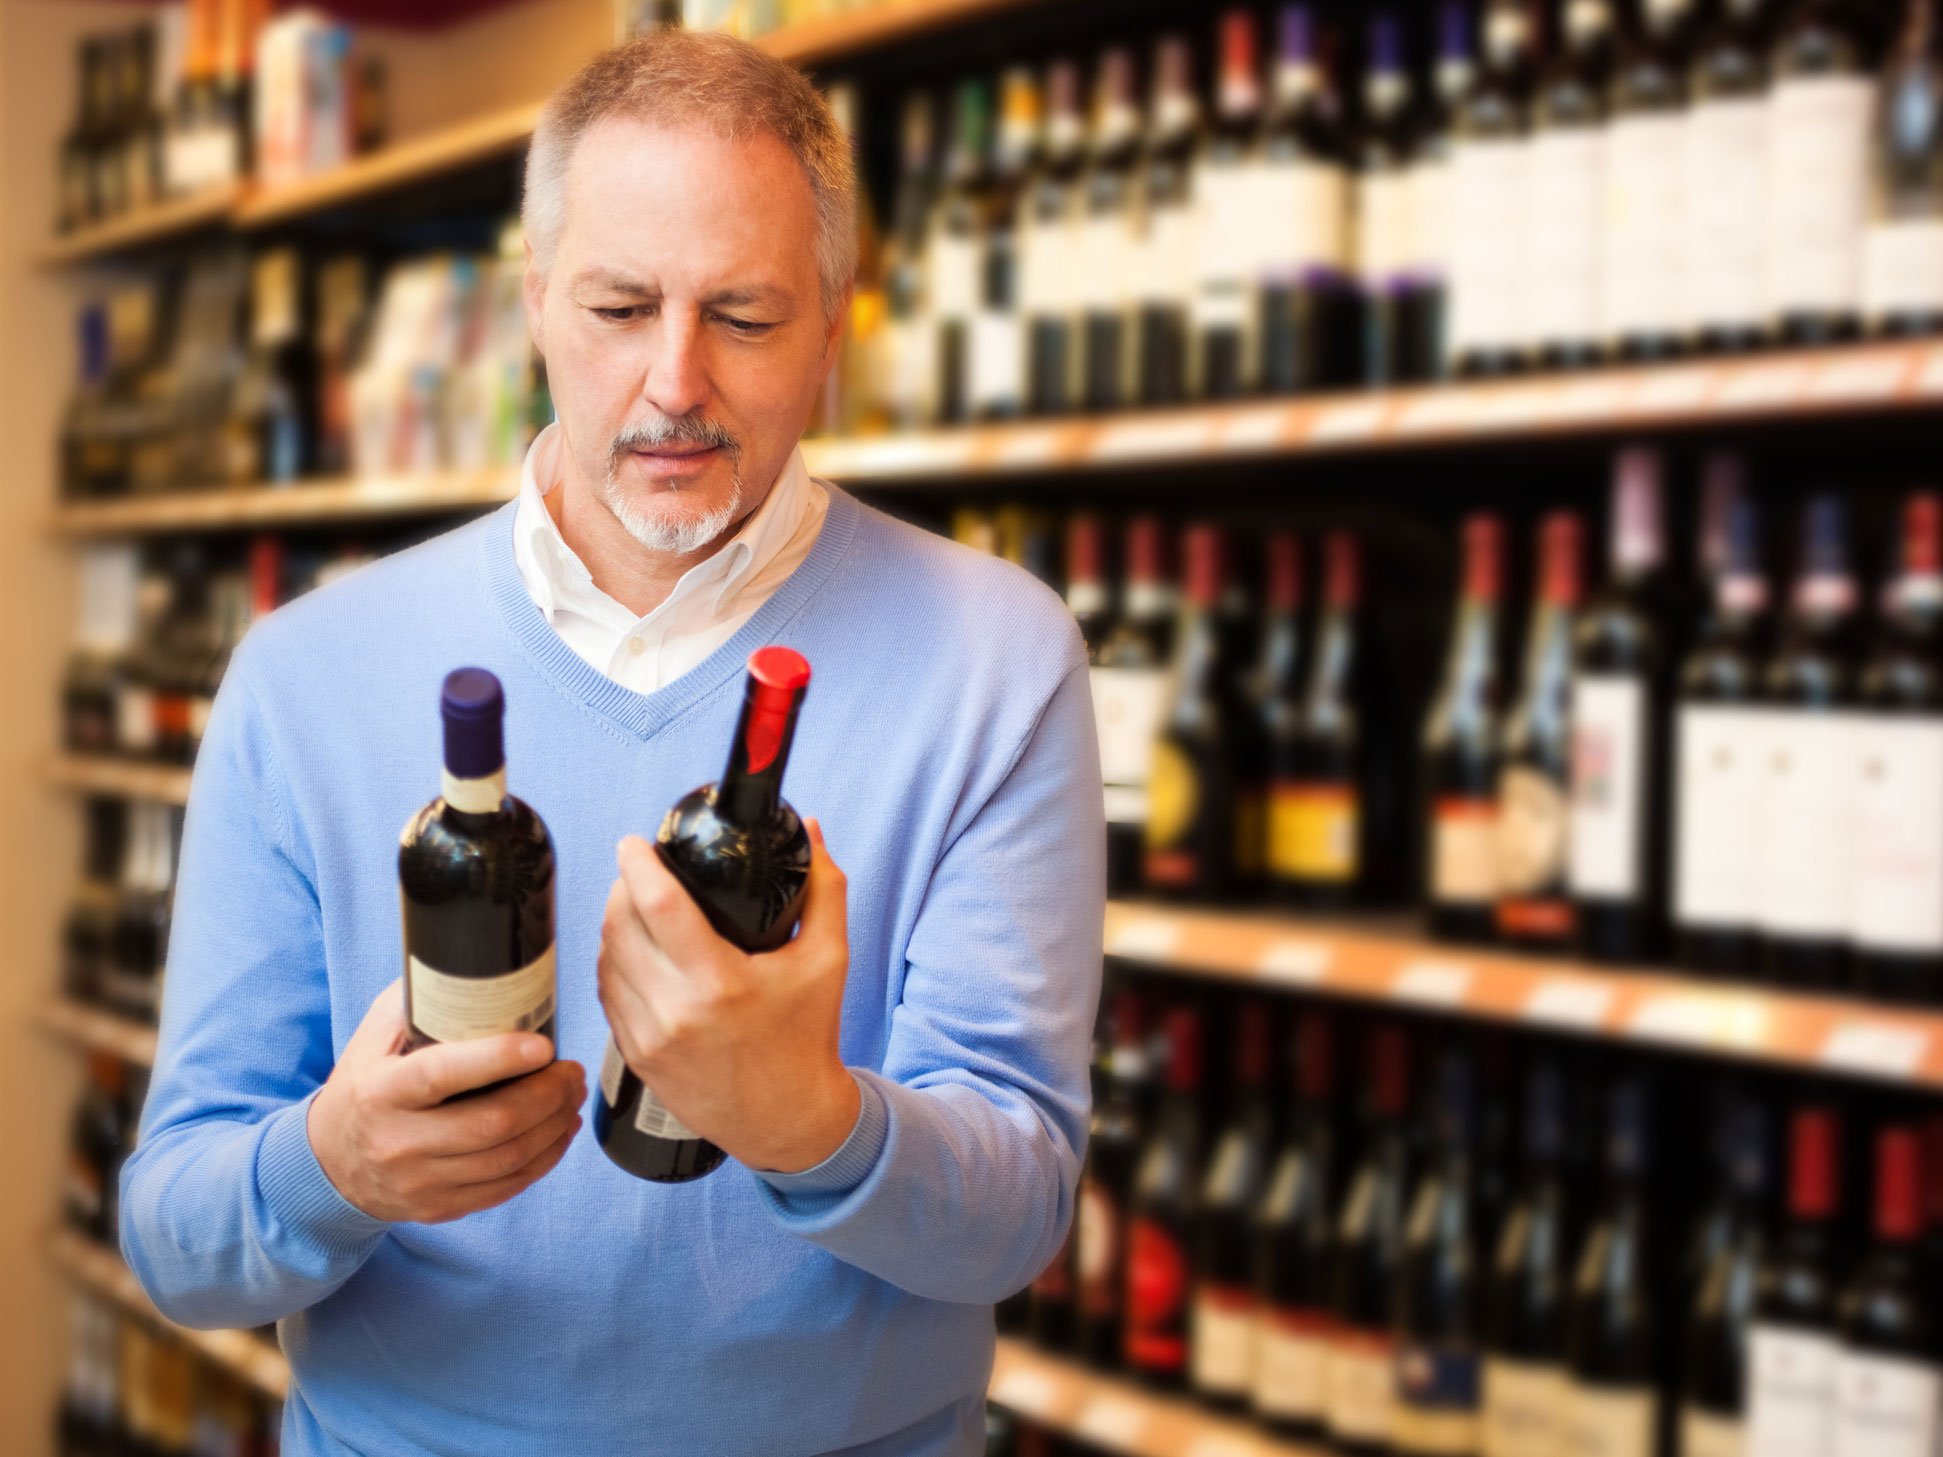 Choosing the right wine for your healthier lifestyle